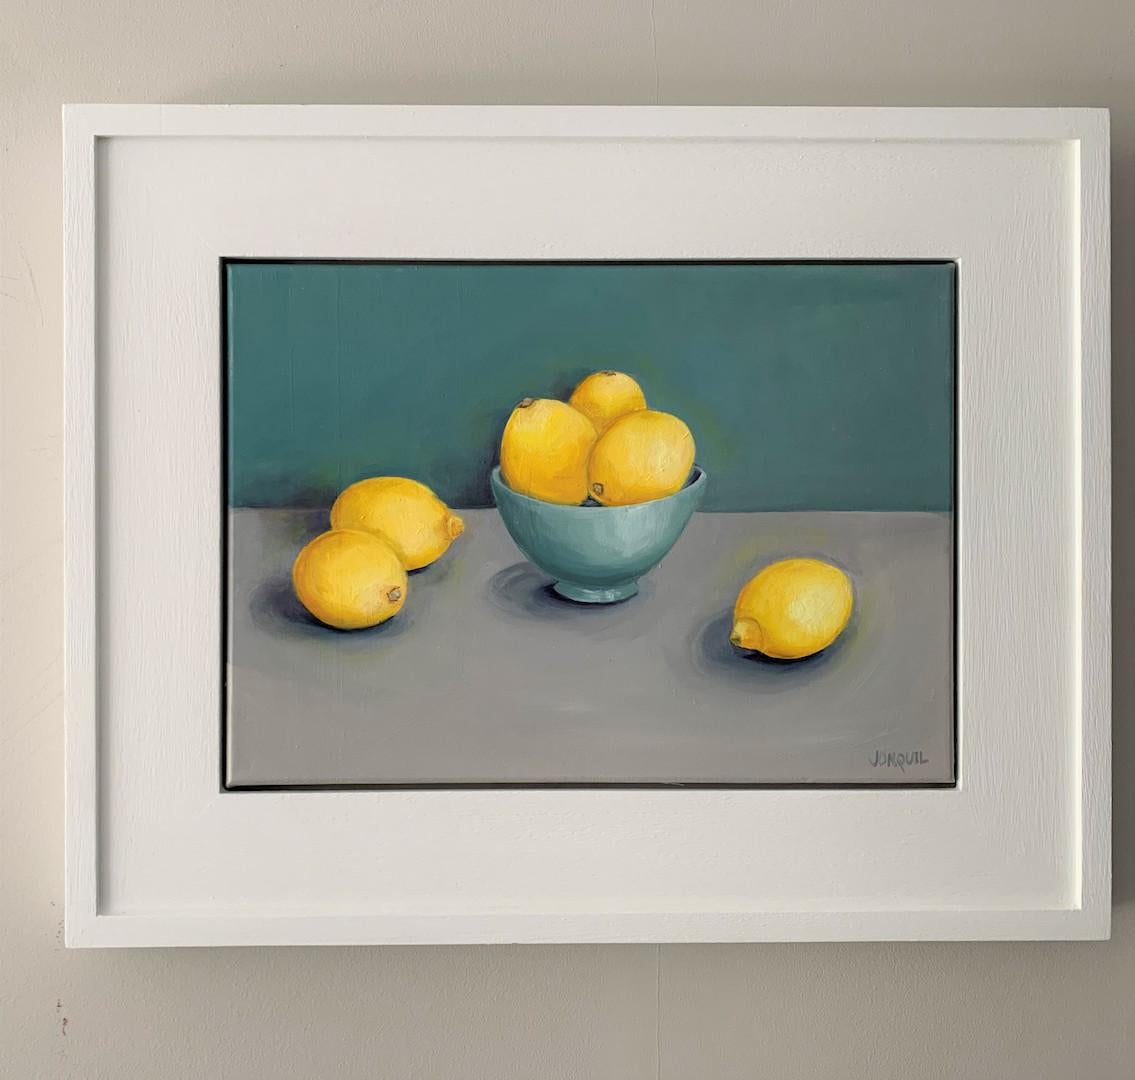 Jonquil Williamson
Lemons
Original Still Life Painting
Oil on Canvas
Image Size: H25 cm x W 35cm x D 1.5 cm
Framed Size: H 41cm x W 51cm x D 3cm
Sold Framed (white wood inset frame)
Please note that in situ images are purely an indication of how a